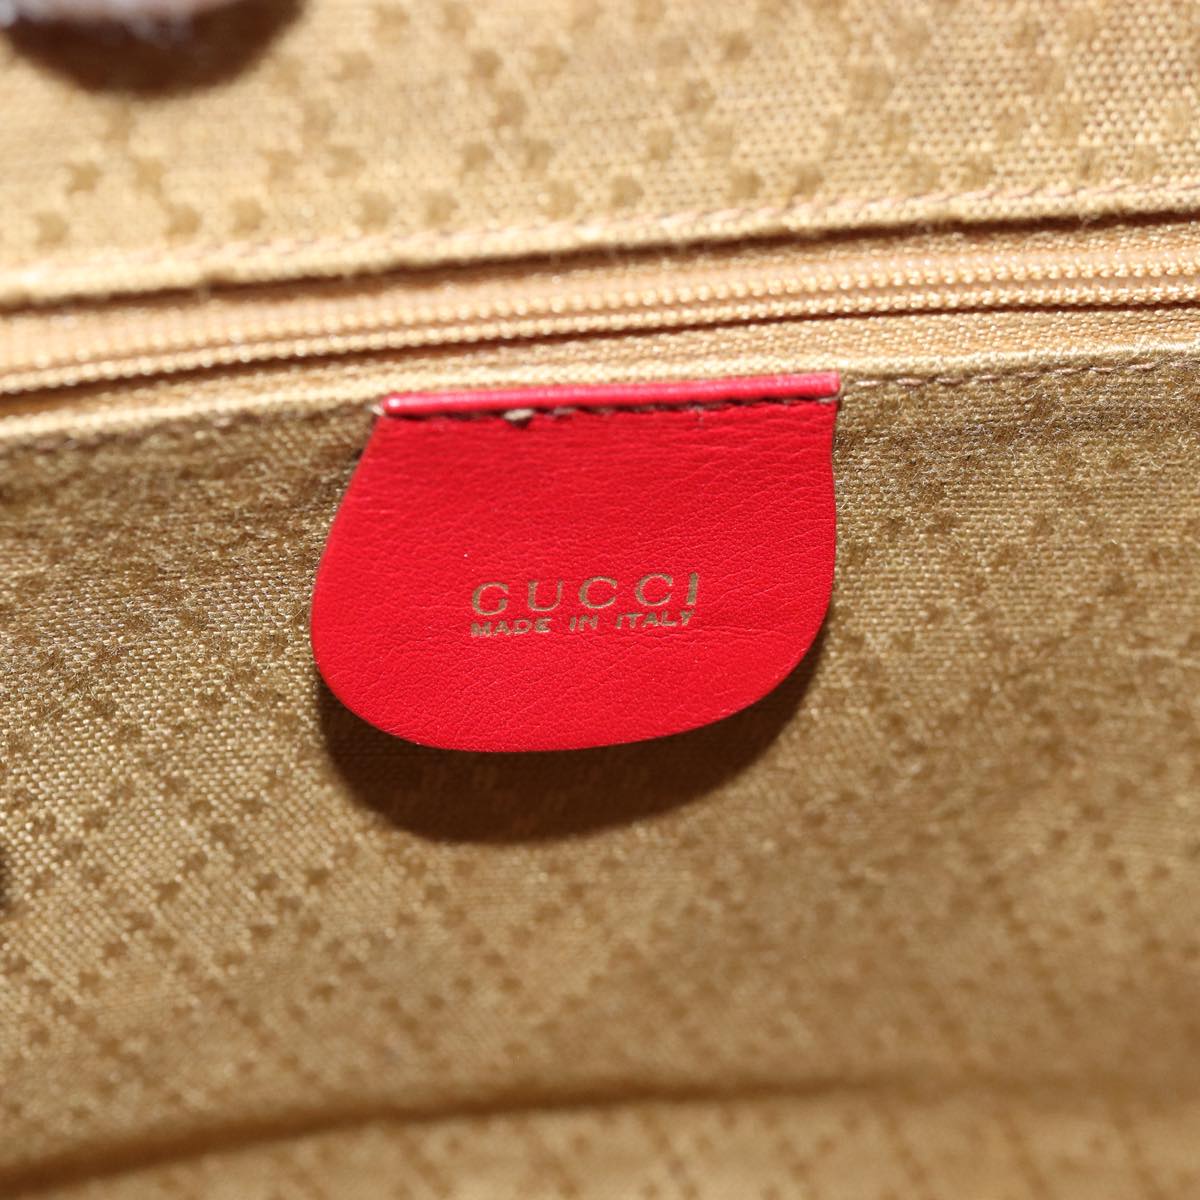 GUCCI Bamboo Backpack Leather Red 003 2852 0030 0 Auth mr165